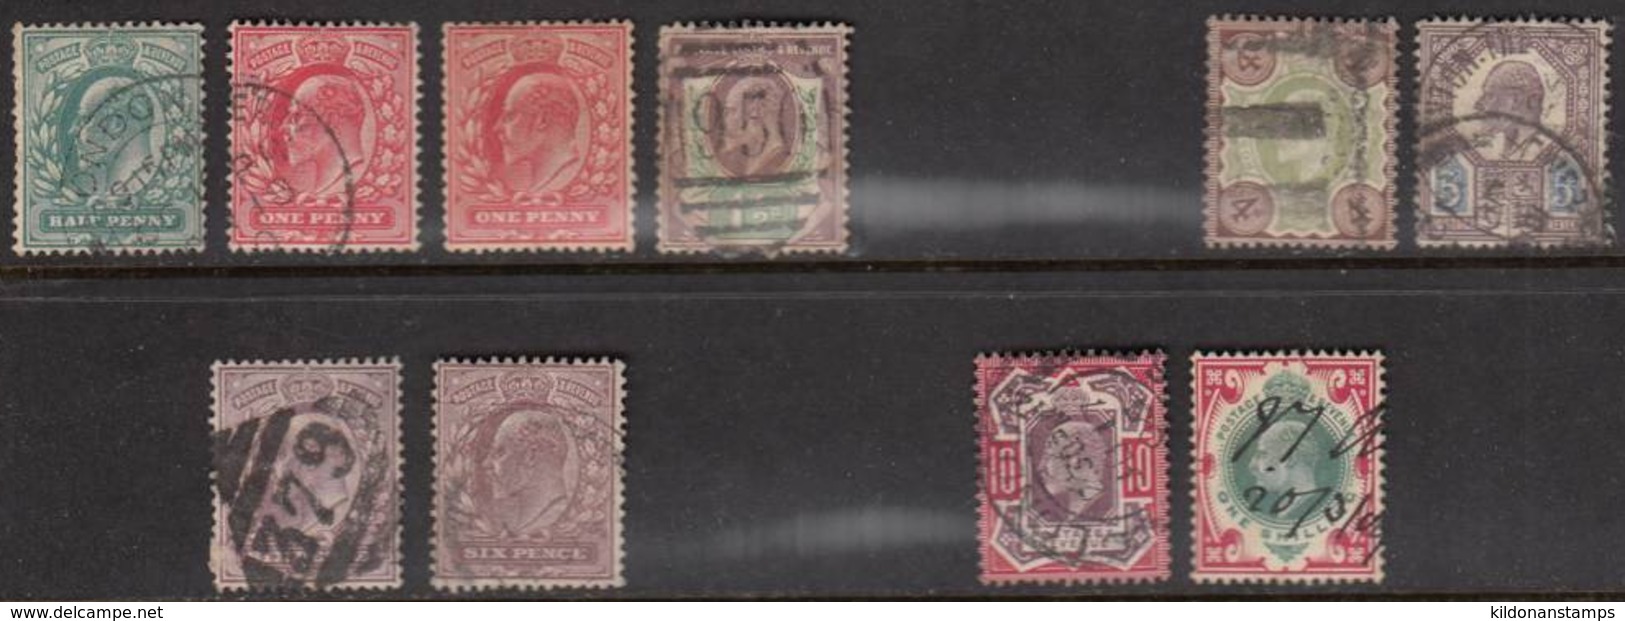 Great Britain 1902 Mint Mounted/cancelled, See Notes, Sc# 127-129,133-134,135a,135b,137a,140 (incl 128a) - Gebruikt